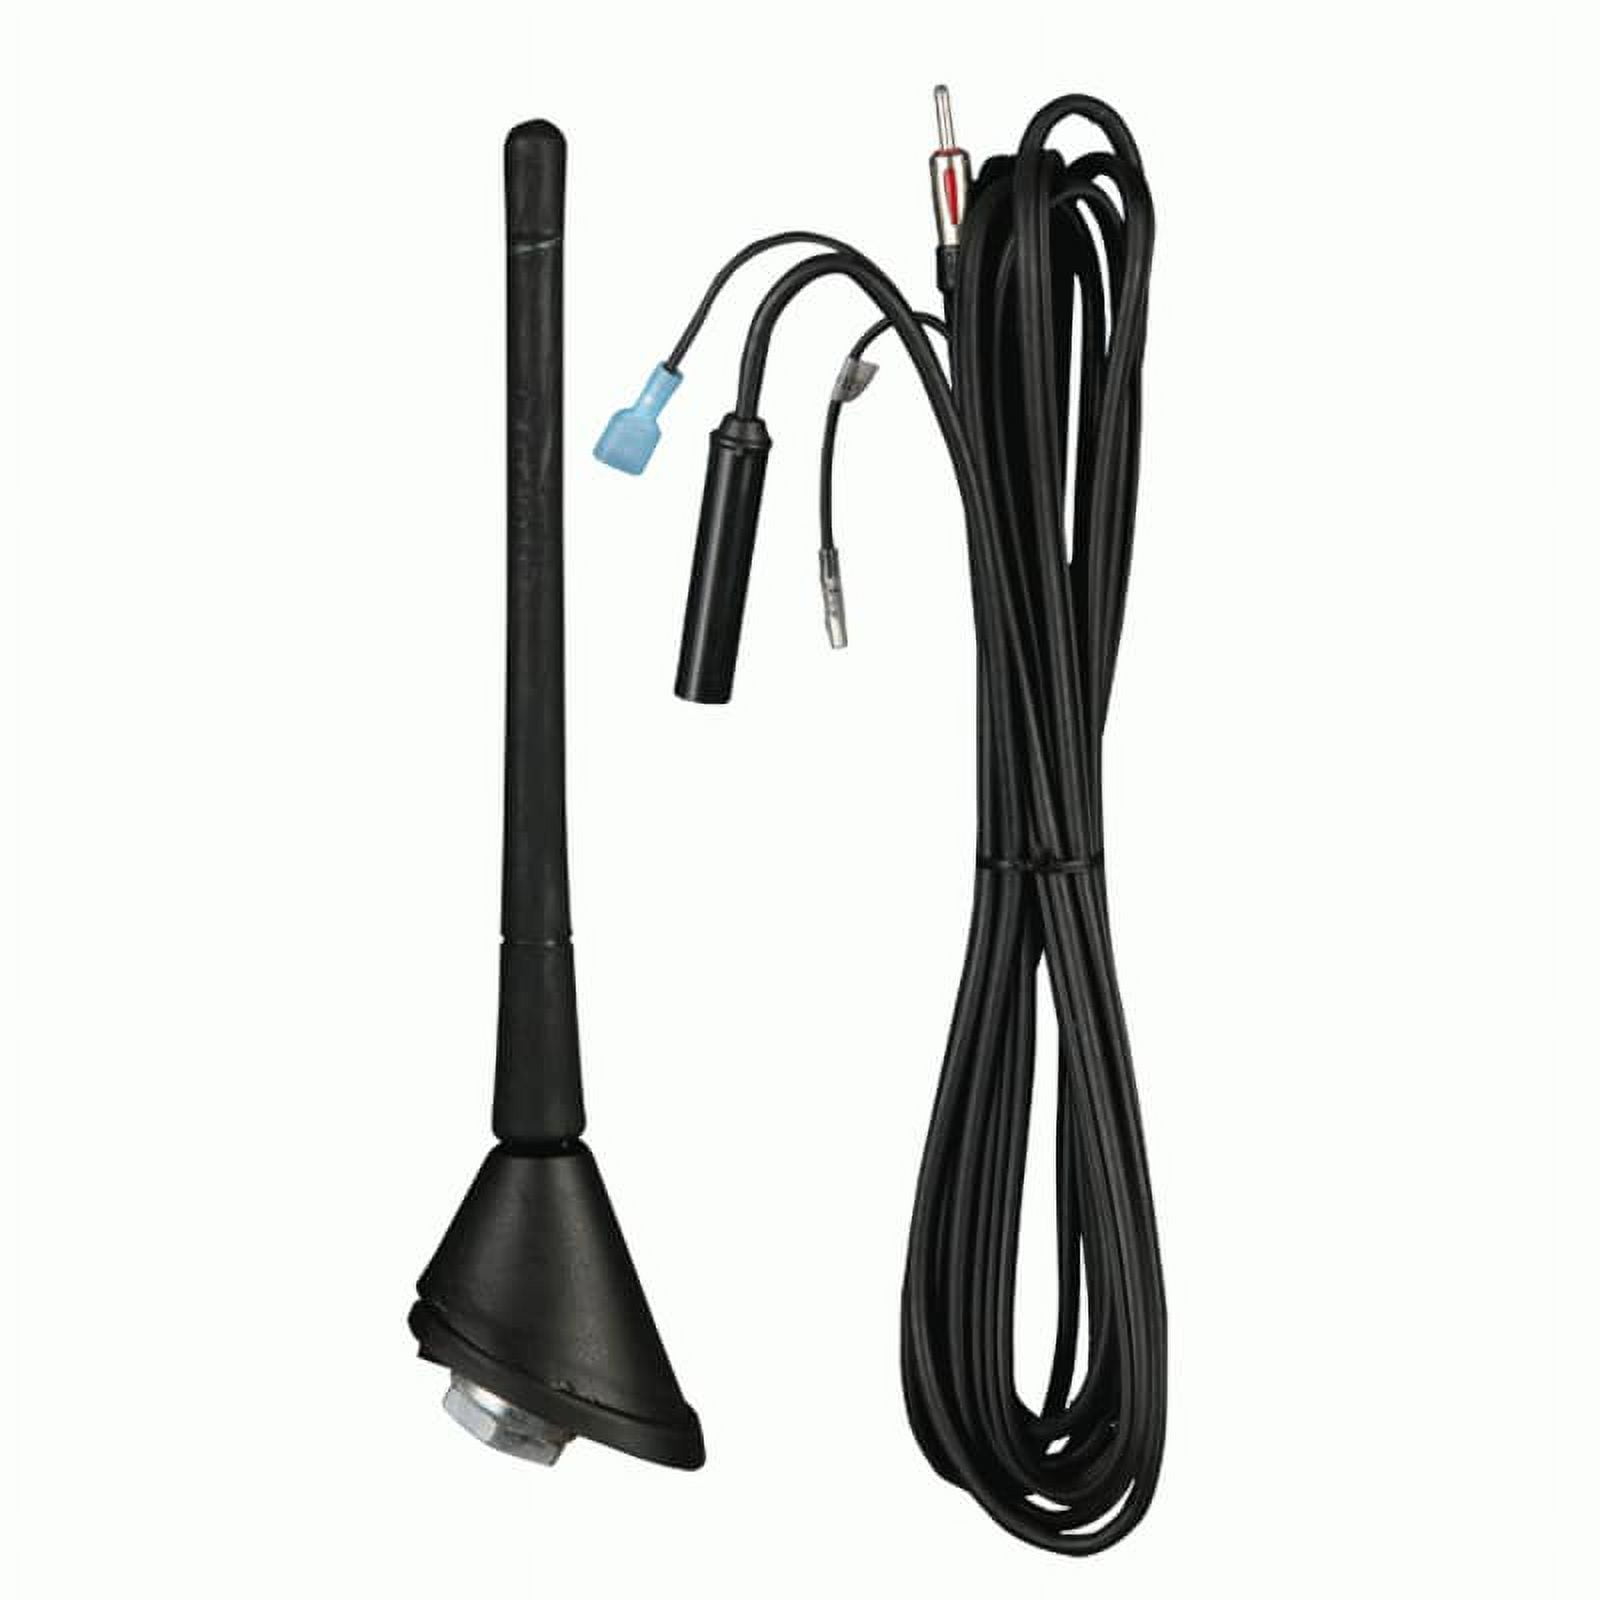 Lieonvis 17inch Car Roof Radio Antenna Car Radio Aerial AM-FM Rubber Antenna  with 180-degrees Swivel Base and 51 Cable Flexible Roof Mount Signal Aerial  for Car Vehicles 